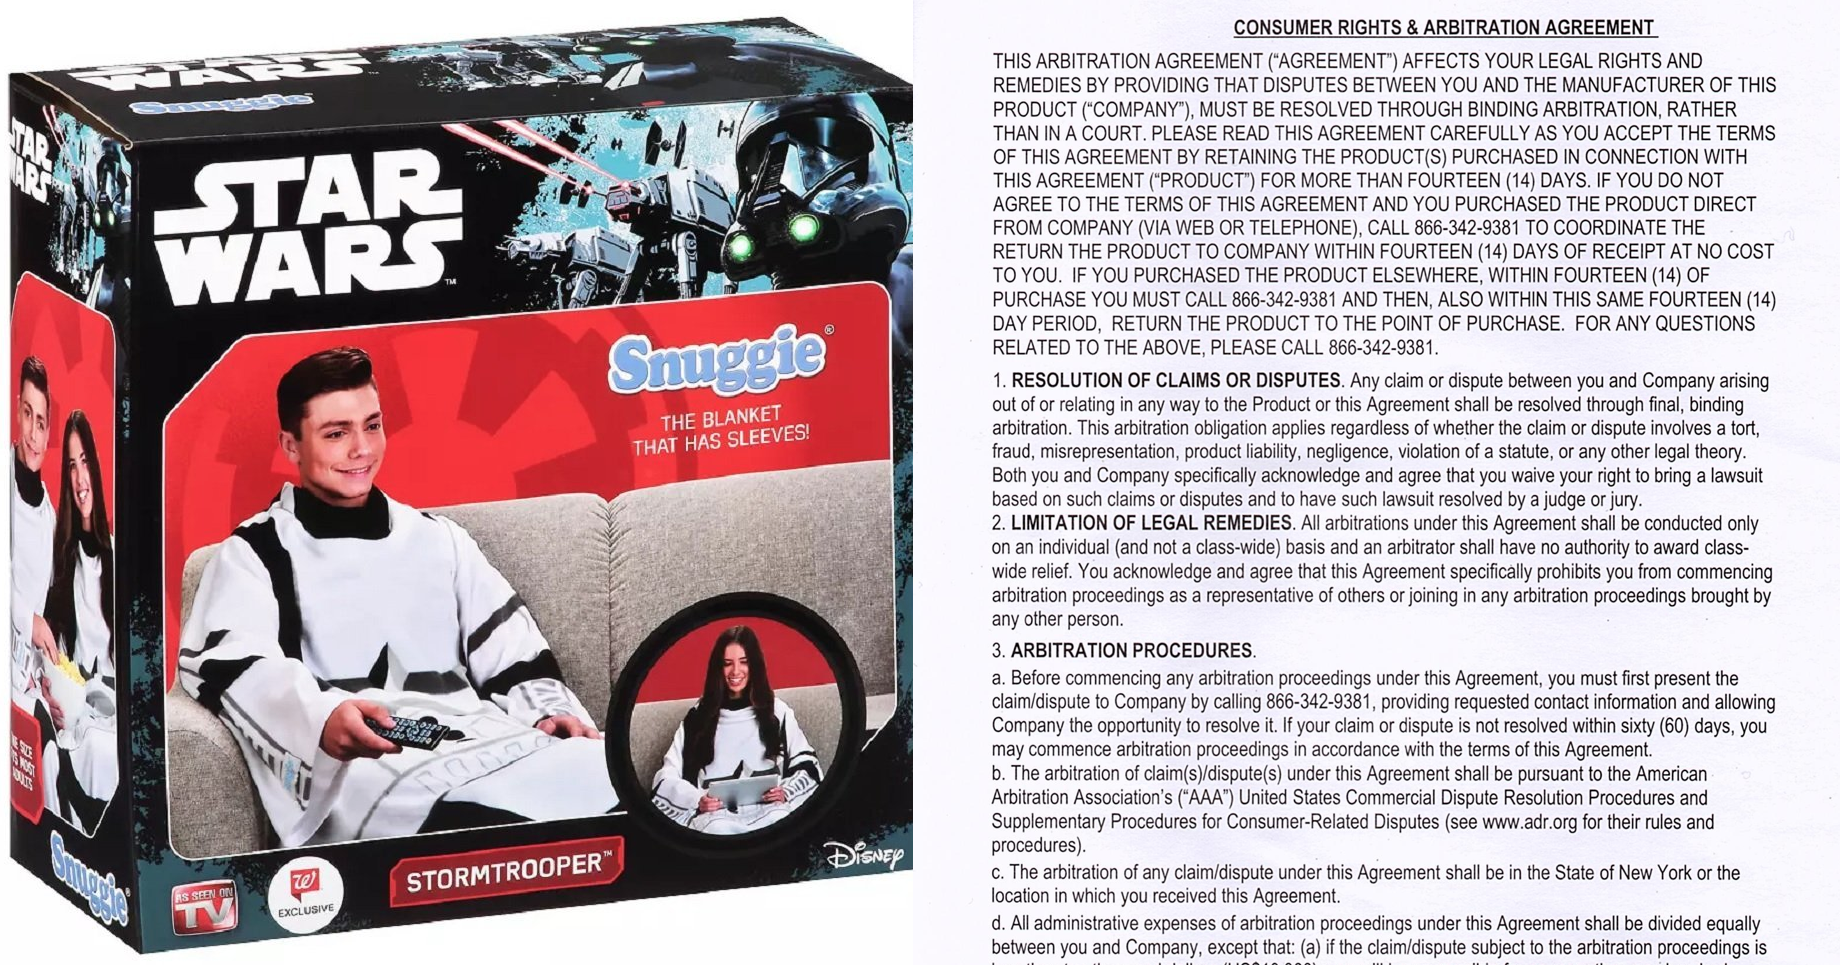 Your New Stormtrooper Snuggie Comes With A Surprise: It Strips You Of Your Right To File A Lawsuit